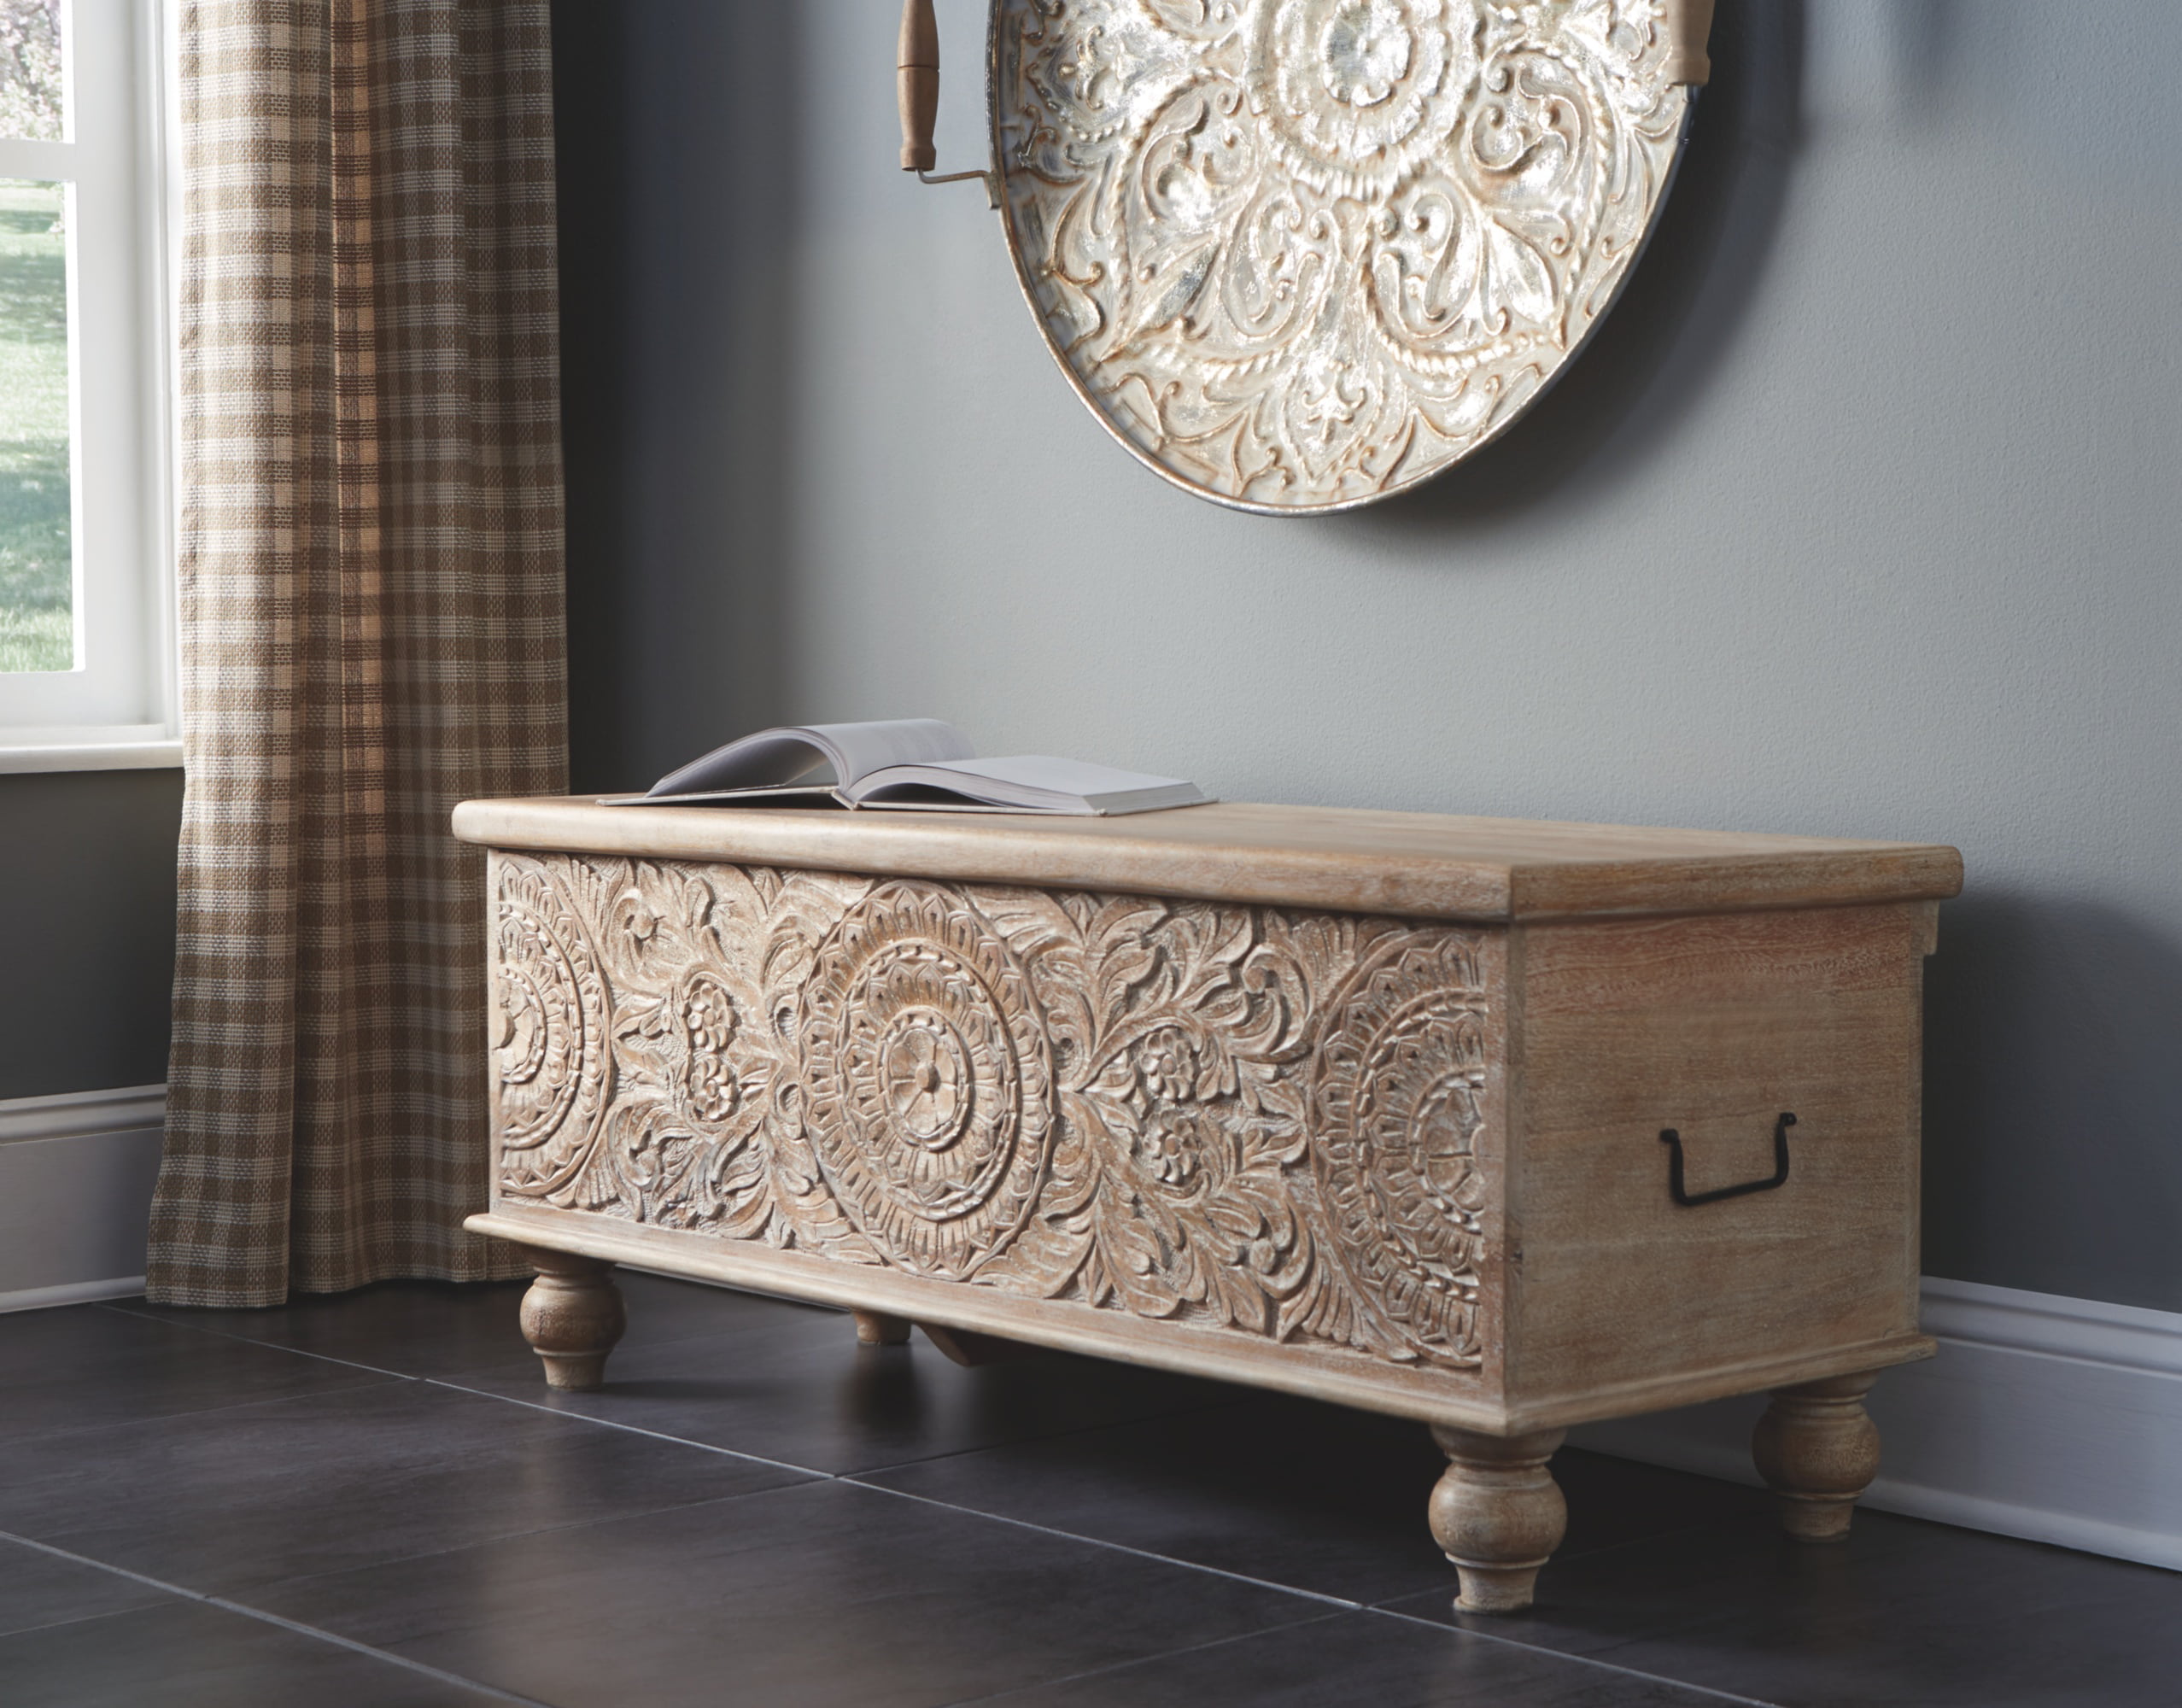 Hand Carved Ashley Furniture Signature Design Antique Beige Finish Solid Wood Hinged Seat Fossil Ridge Storage Bench